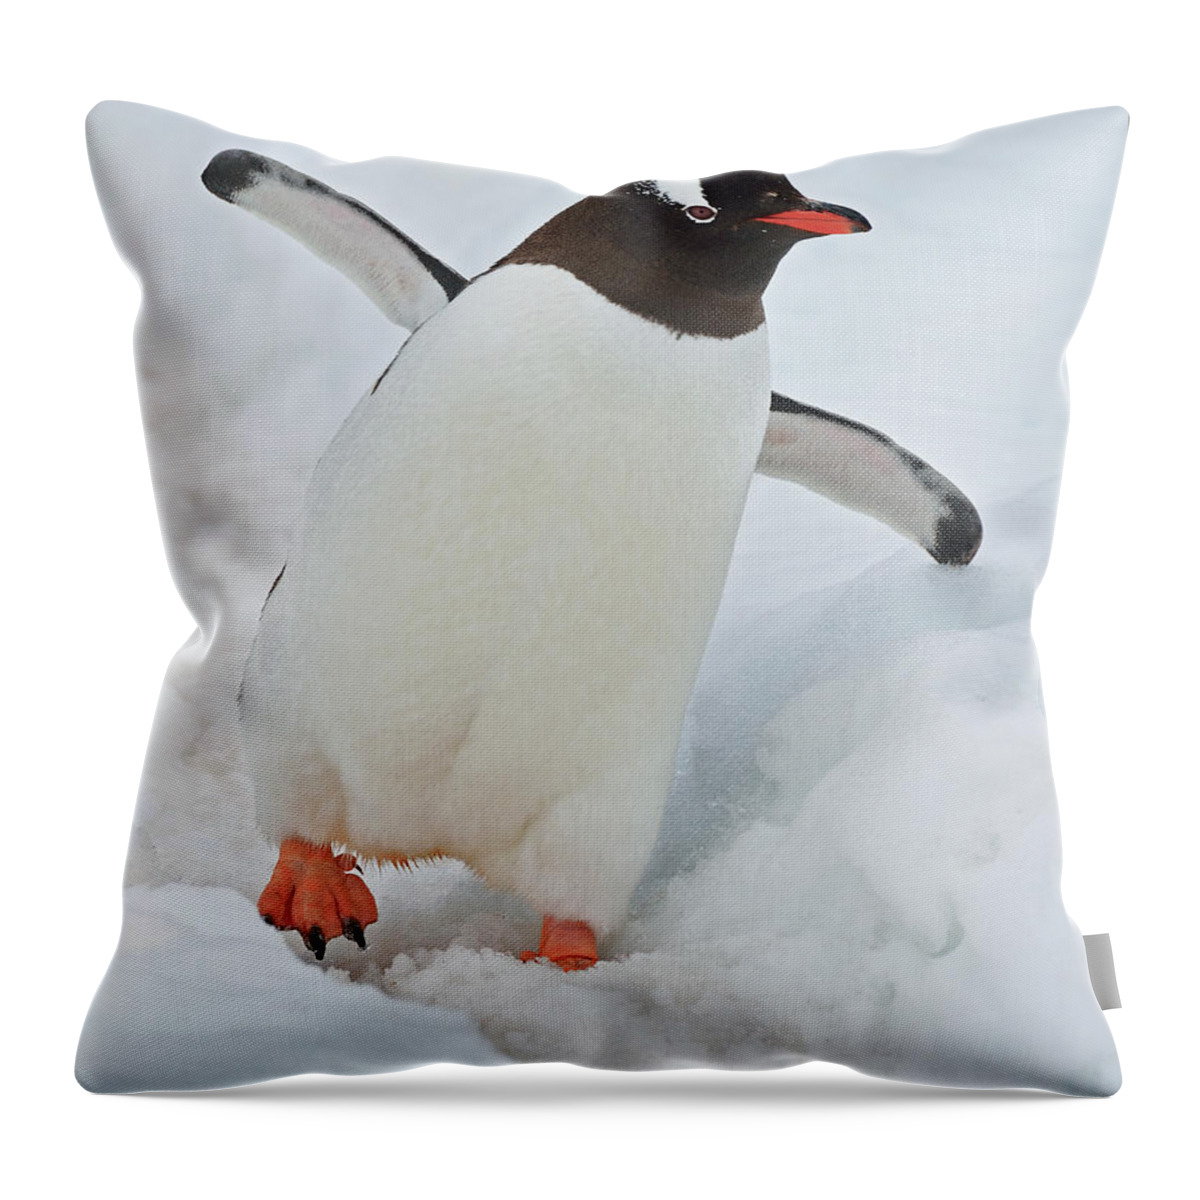 Gentoo Penguin Throw Pillow featuring the photograph Progressive by Tony Beck